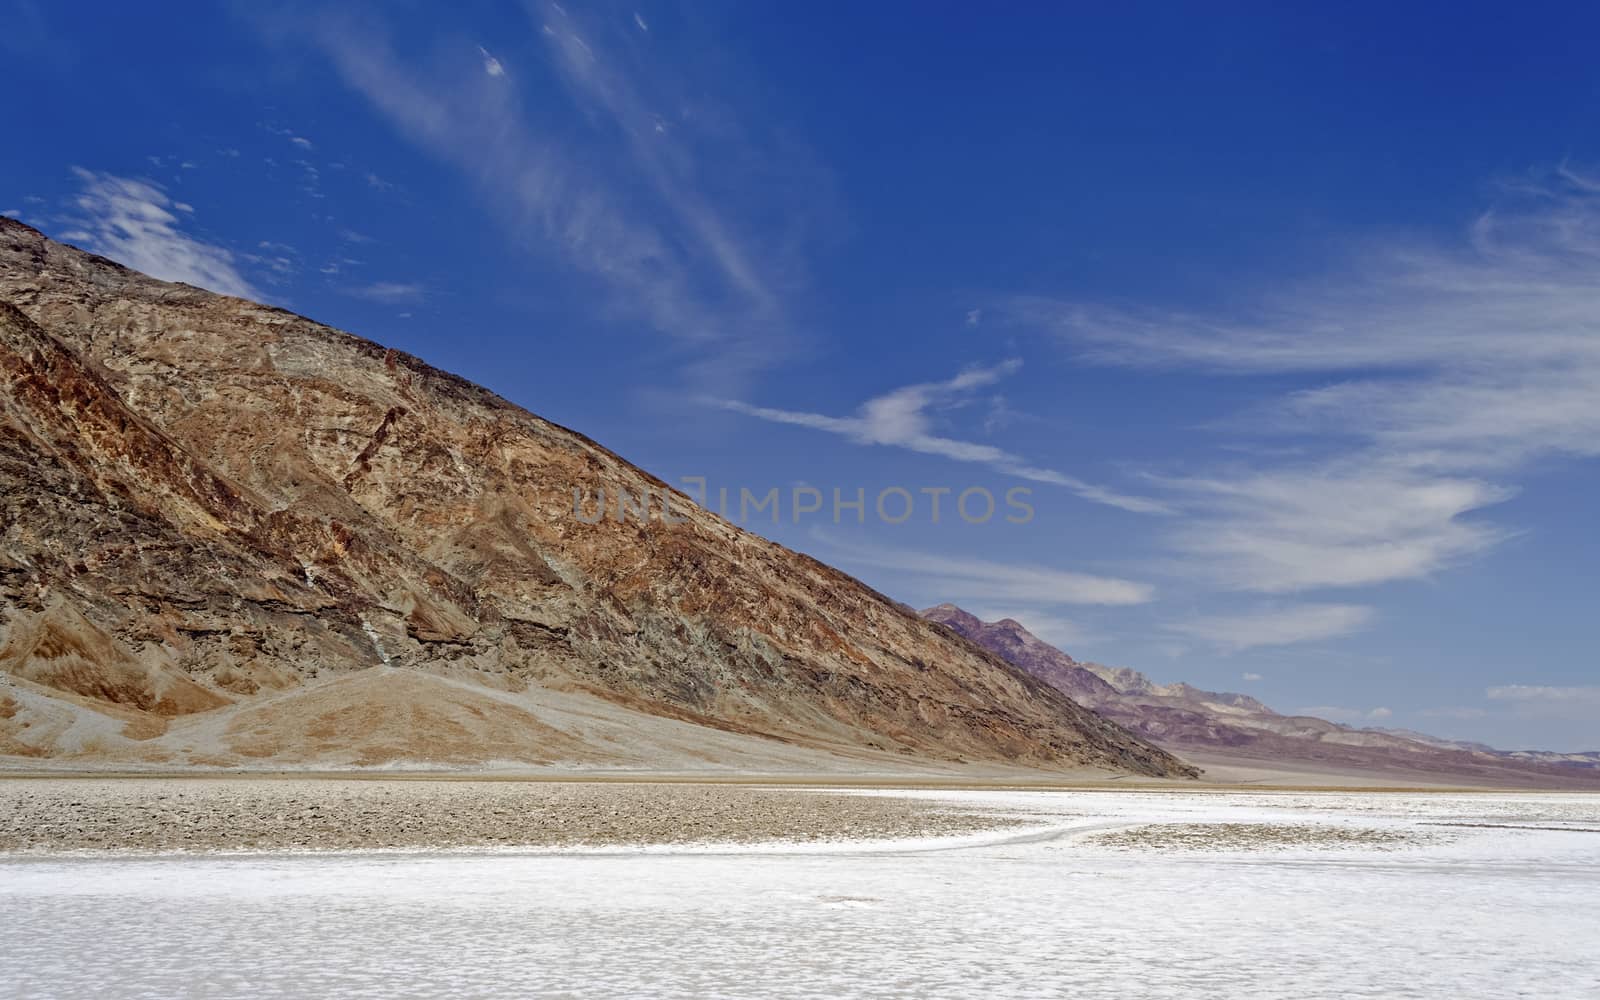 Badwater Basin, Death Valley National park, USA by marcorubino